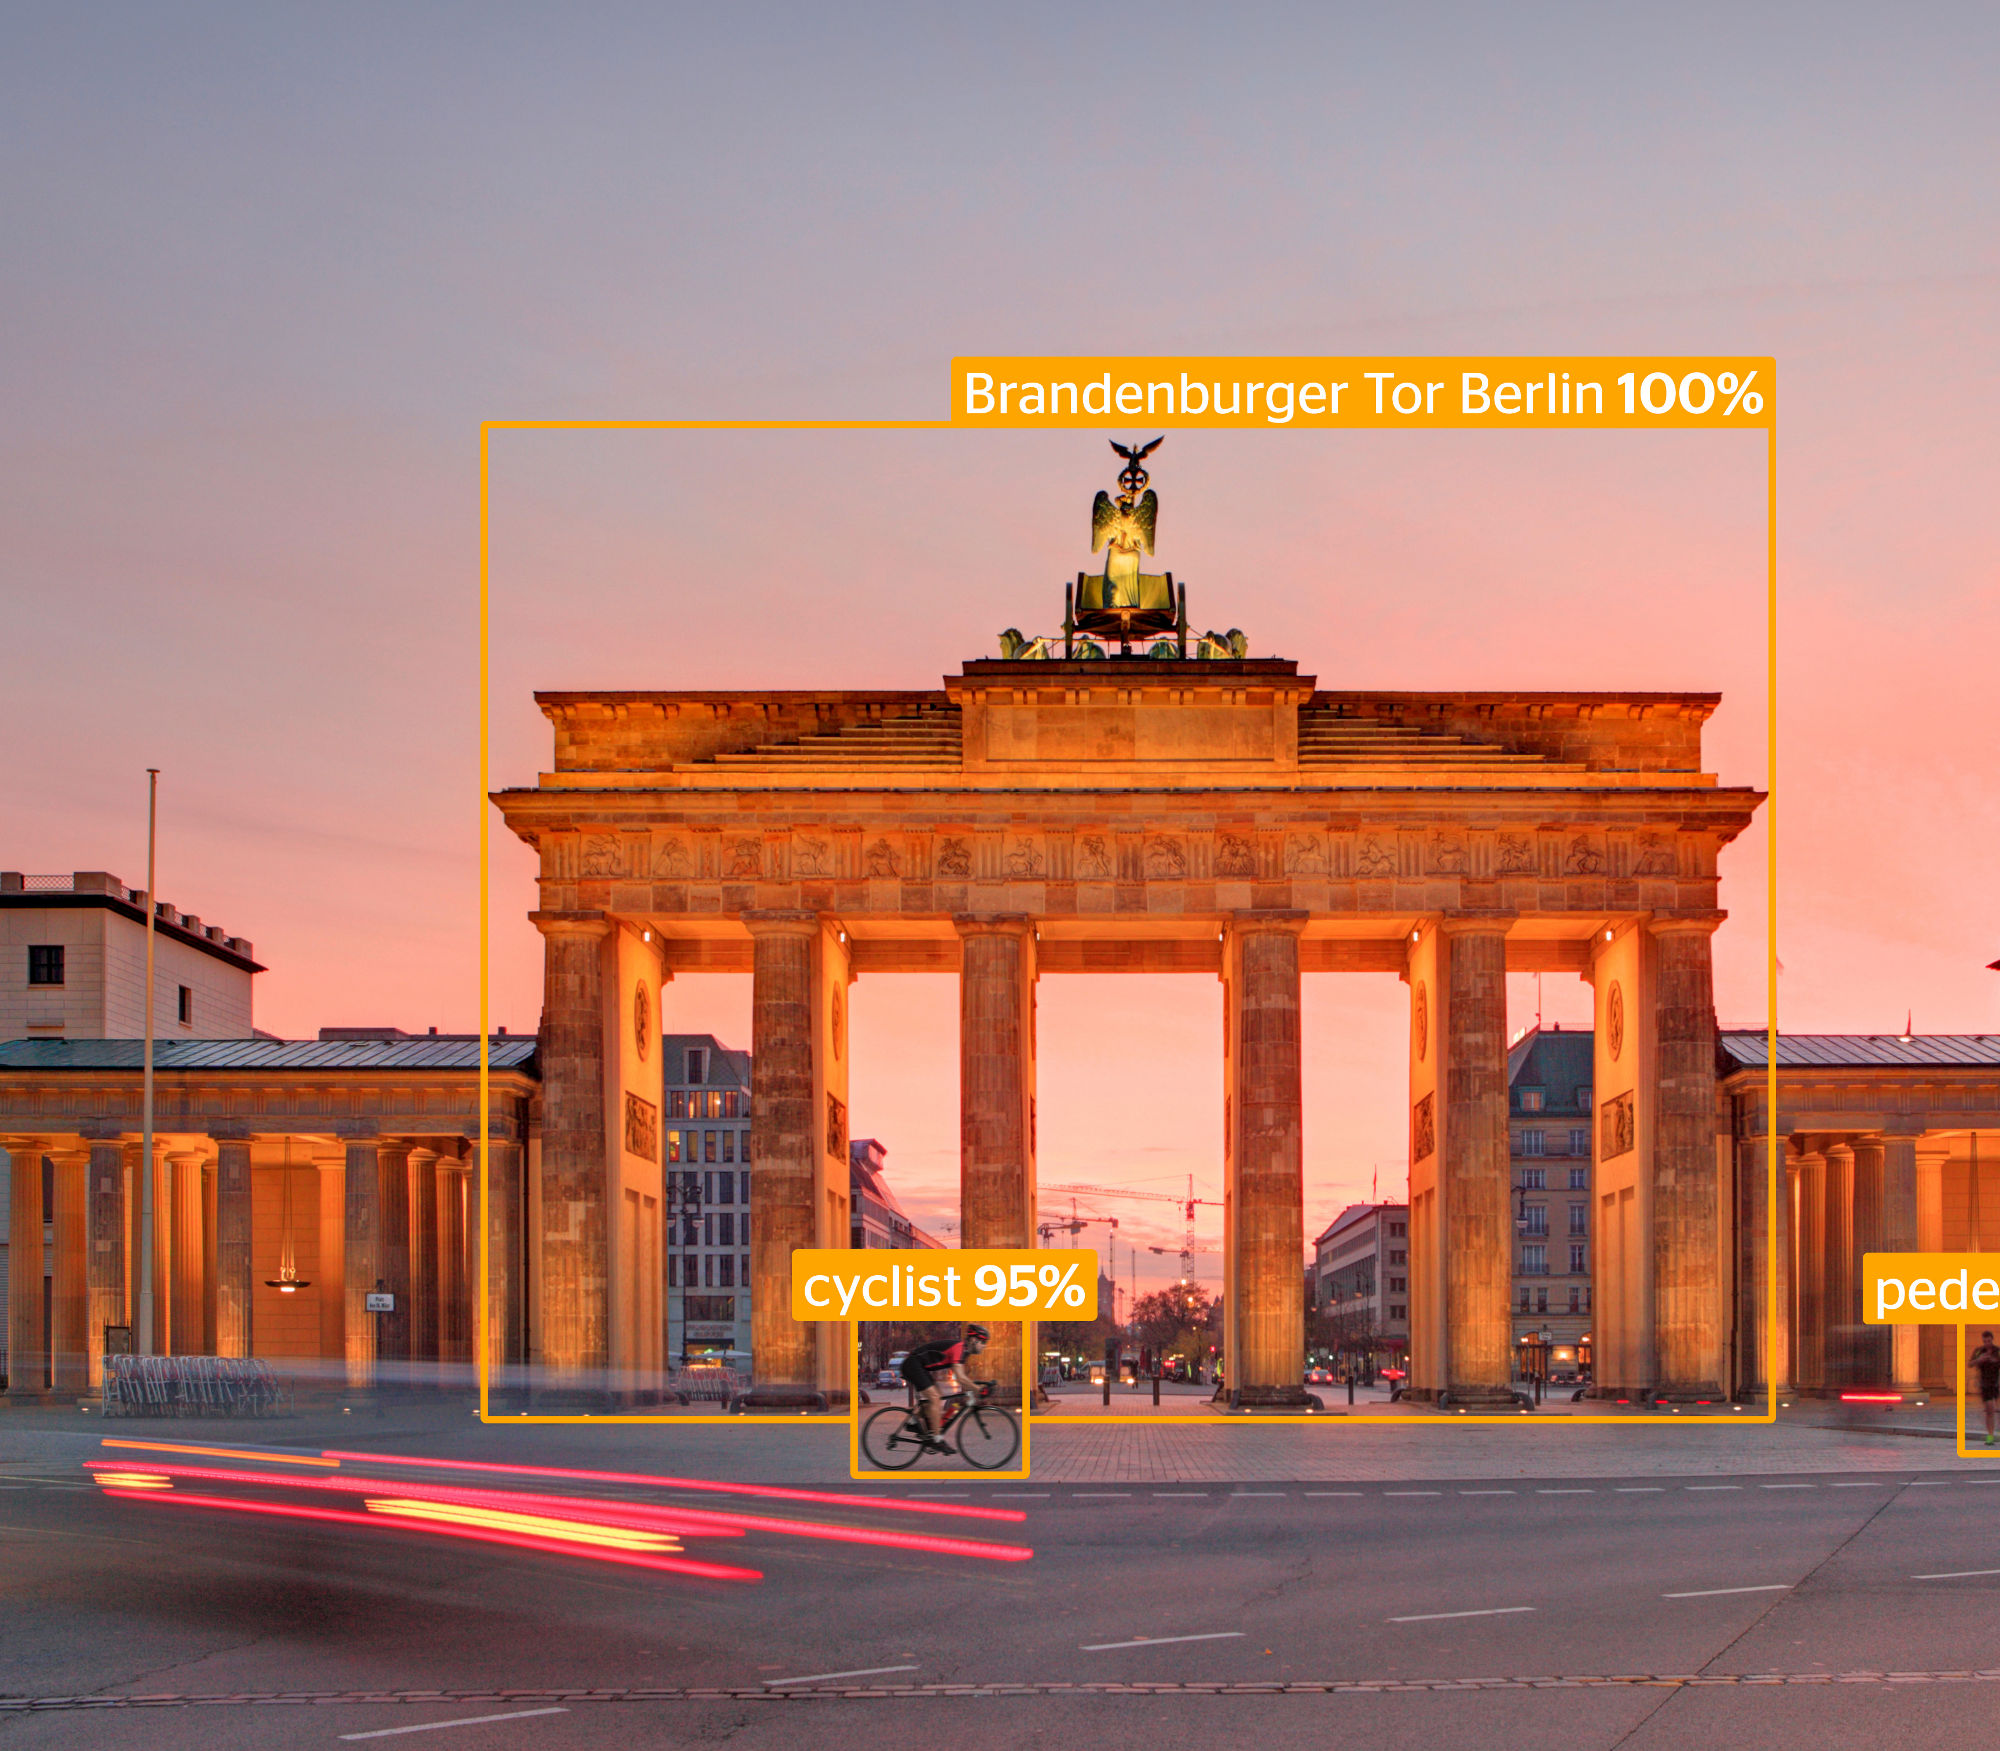 In Berlin, Continental is focusing on artificial intelligence for the mobility of the future.